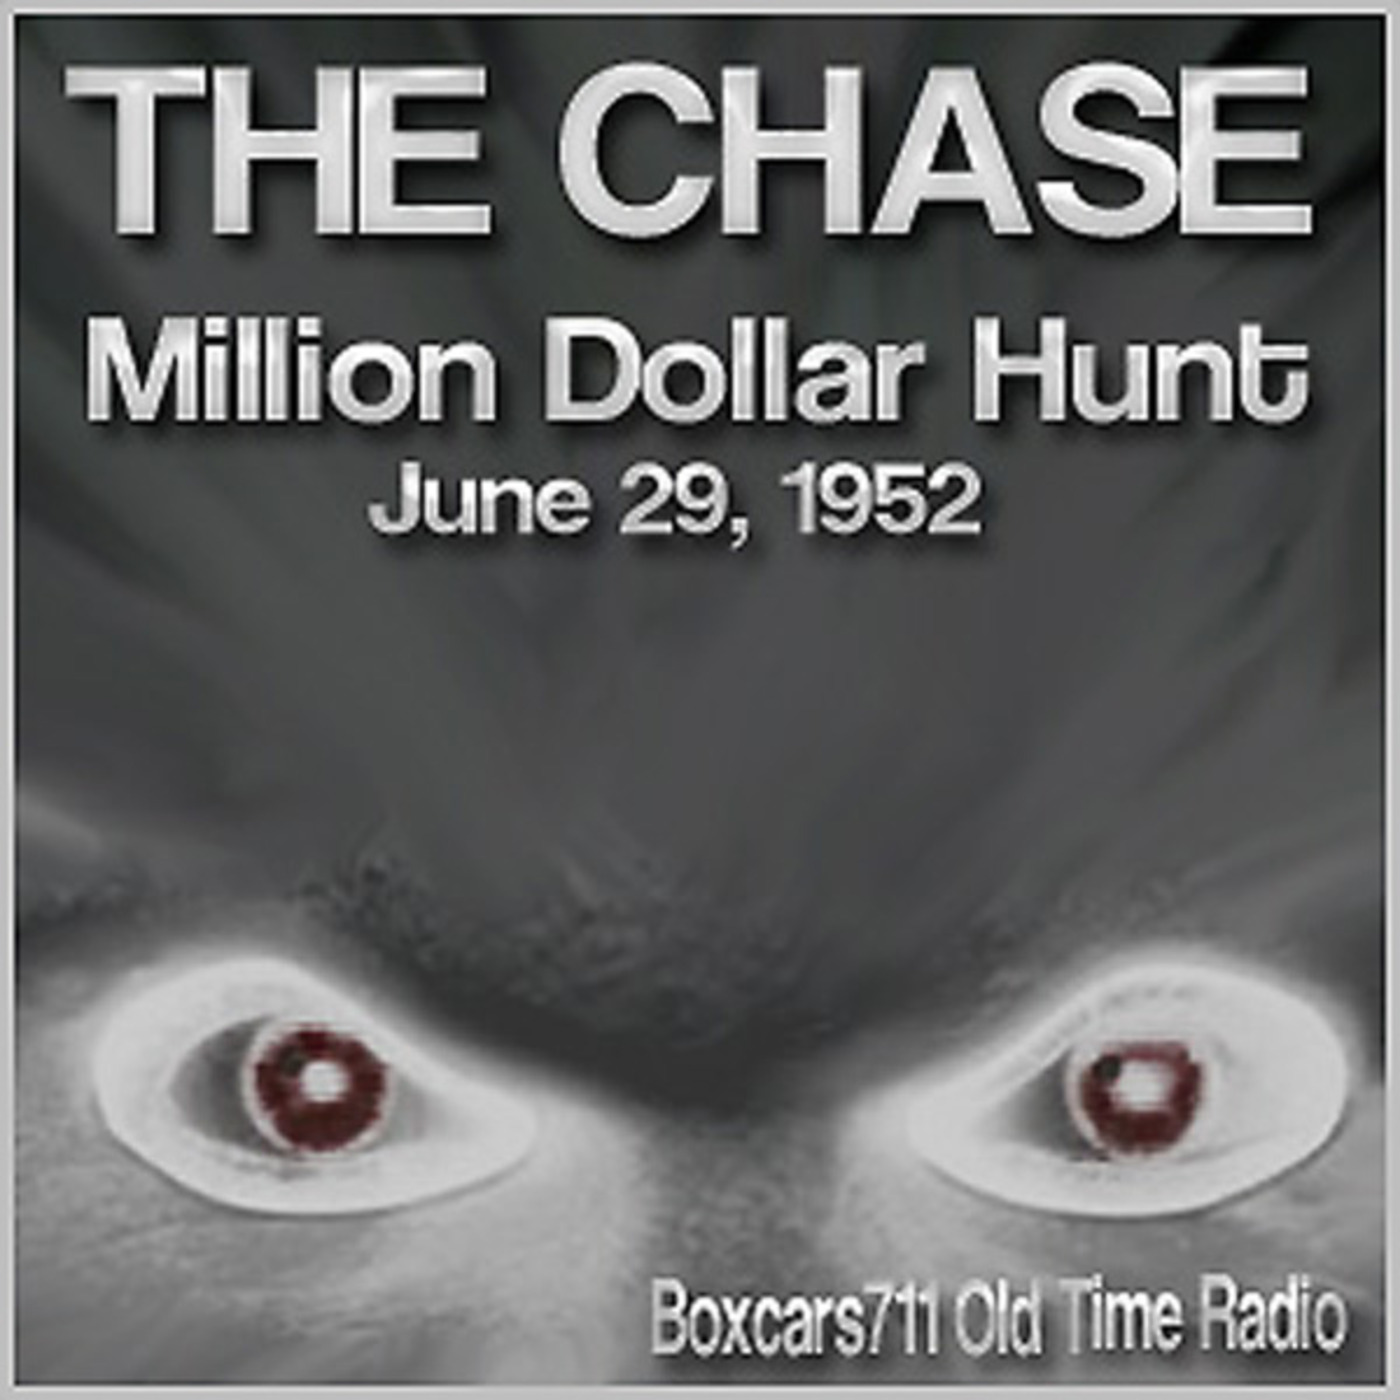 Episode 9617: The Chase - 